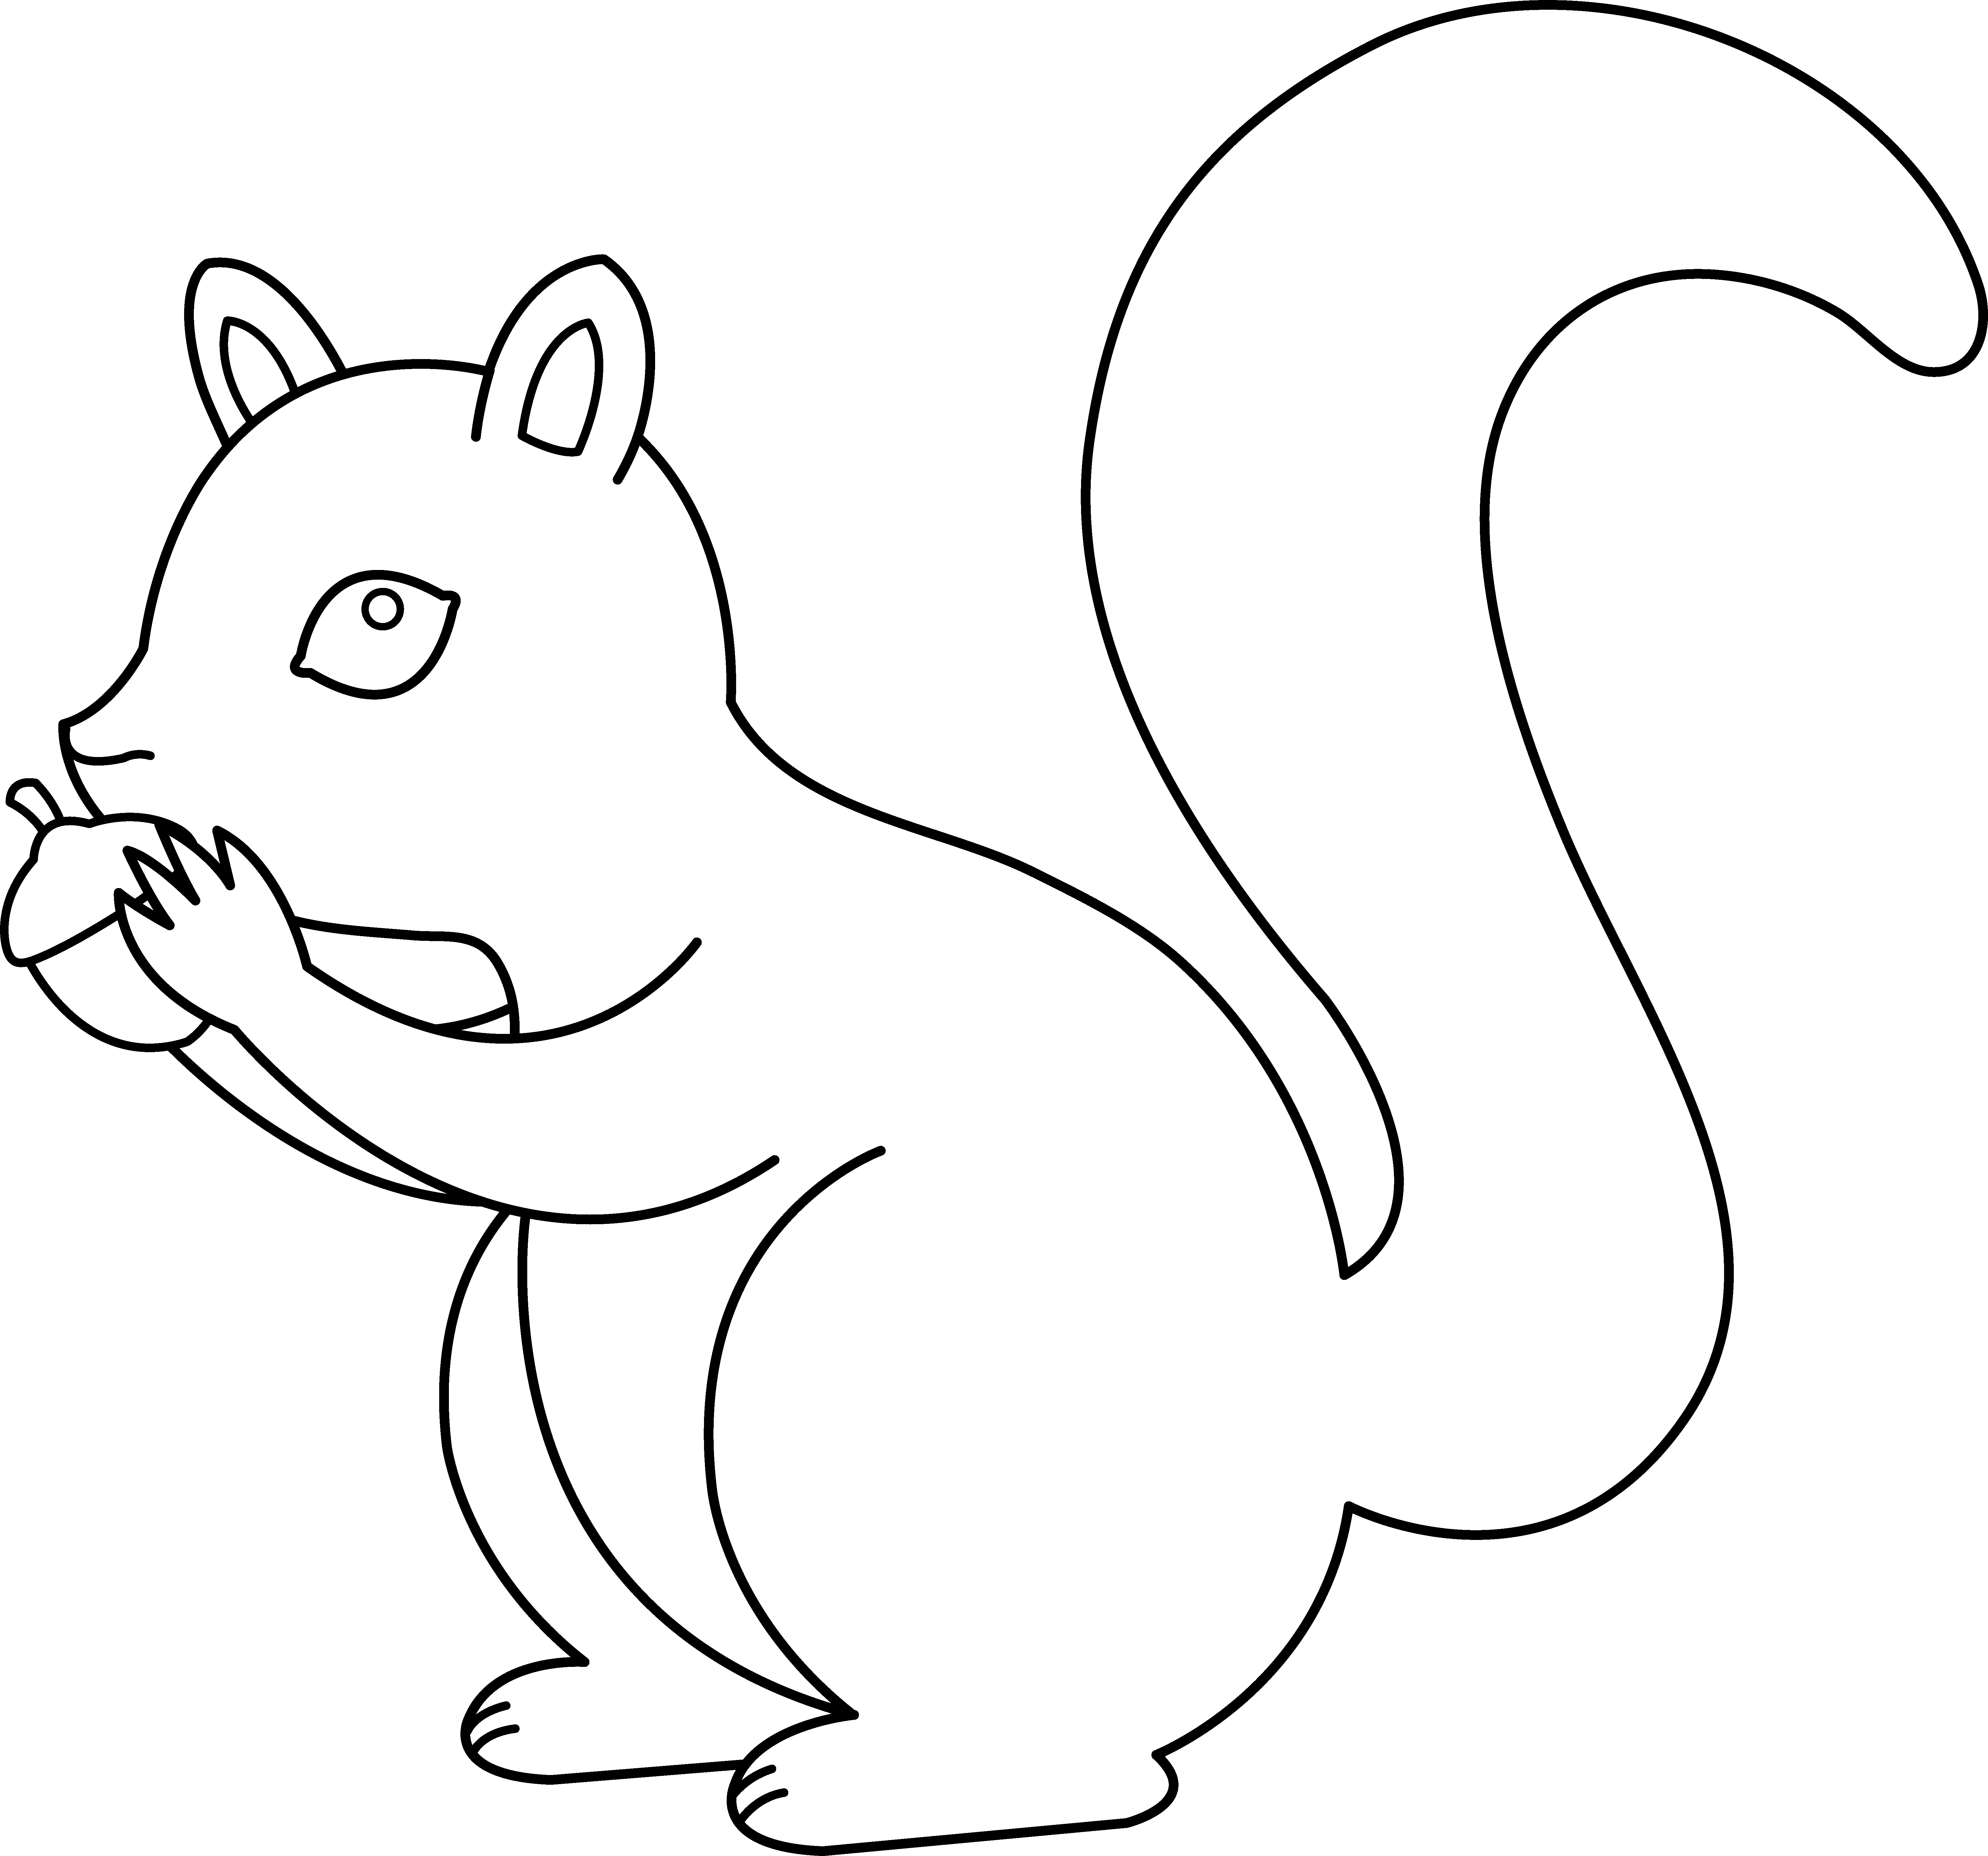 nut clipart colouring page